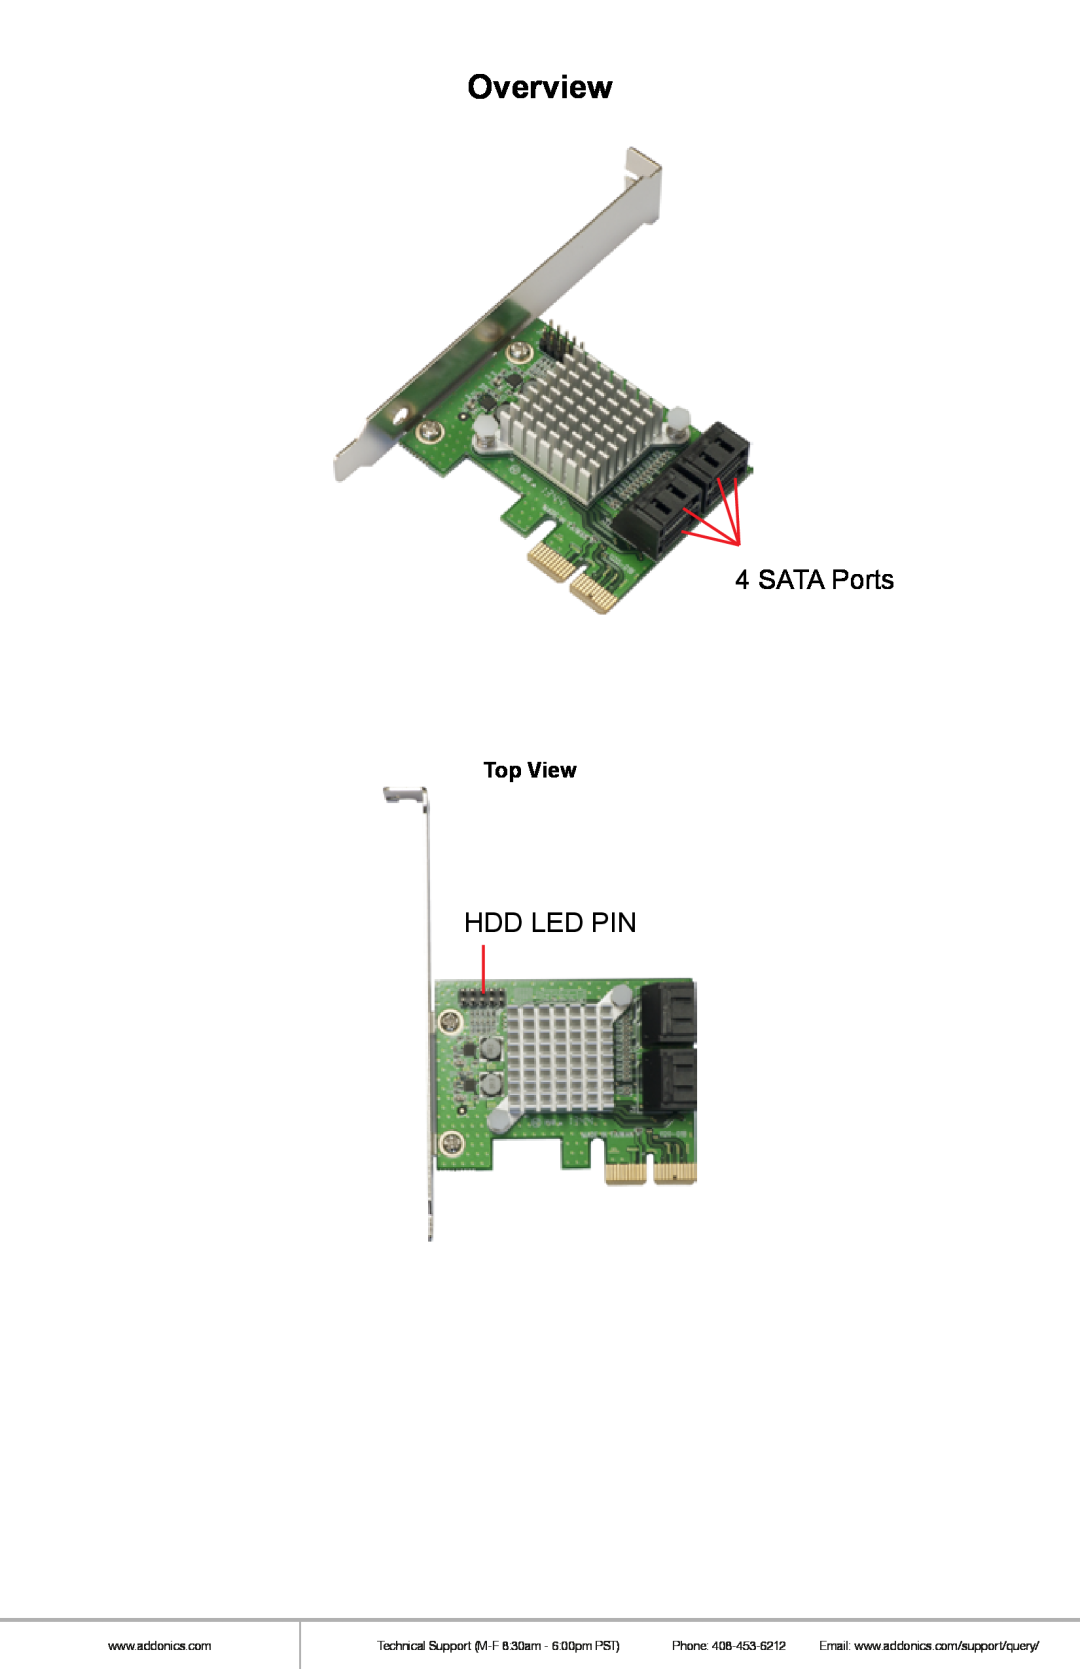 Addonics Technologies AD4SA6GPX2 Overview, SATA Ports, Hdd Led Pin, Top View, Technical Support M-F 830am - 600pm PST 